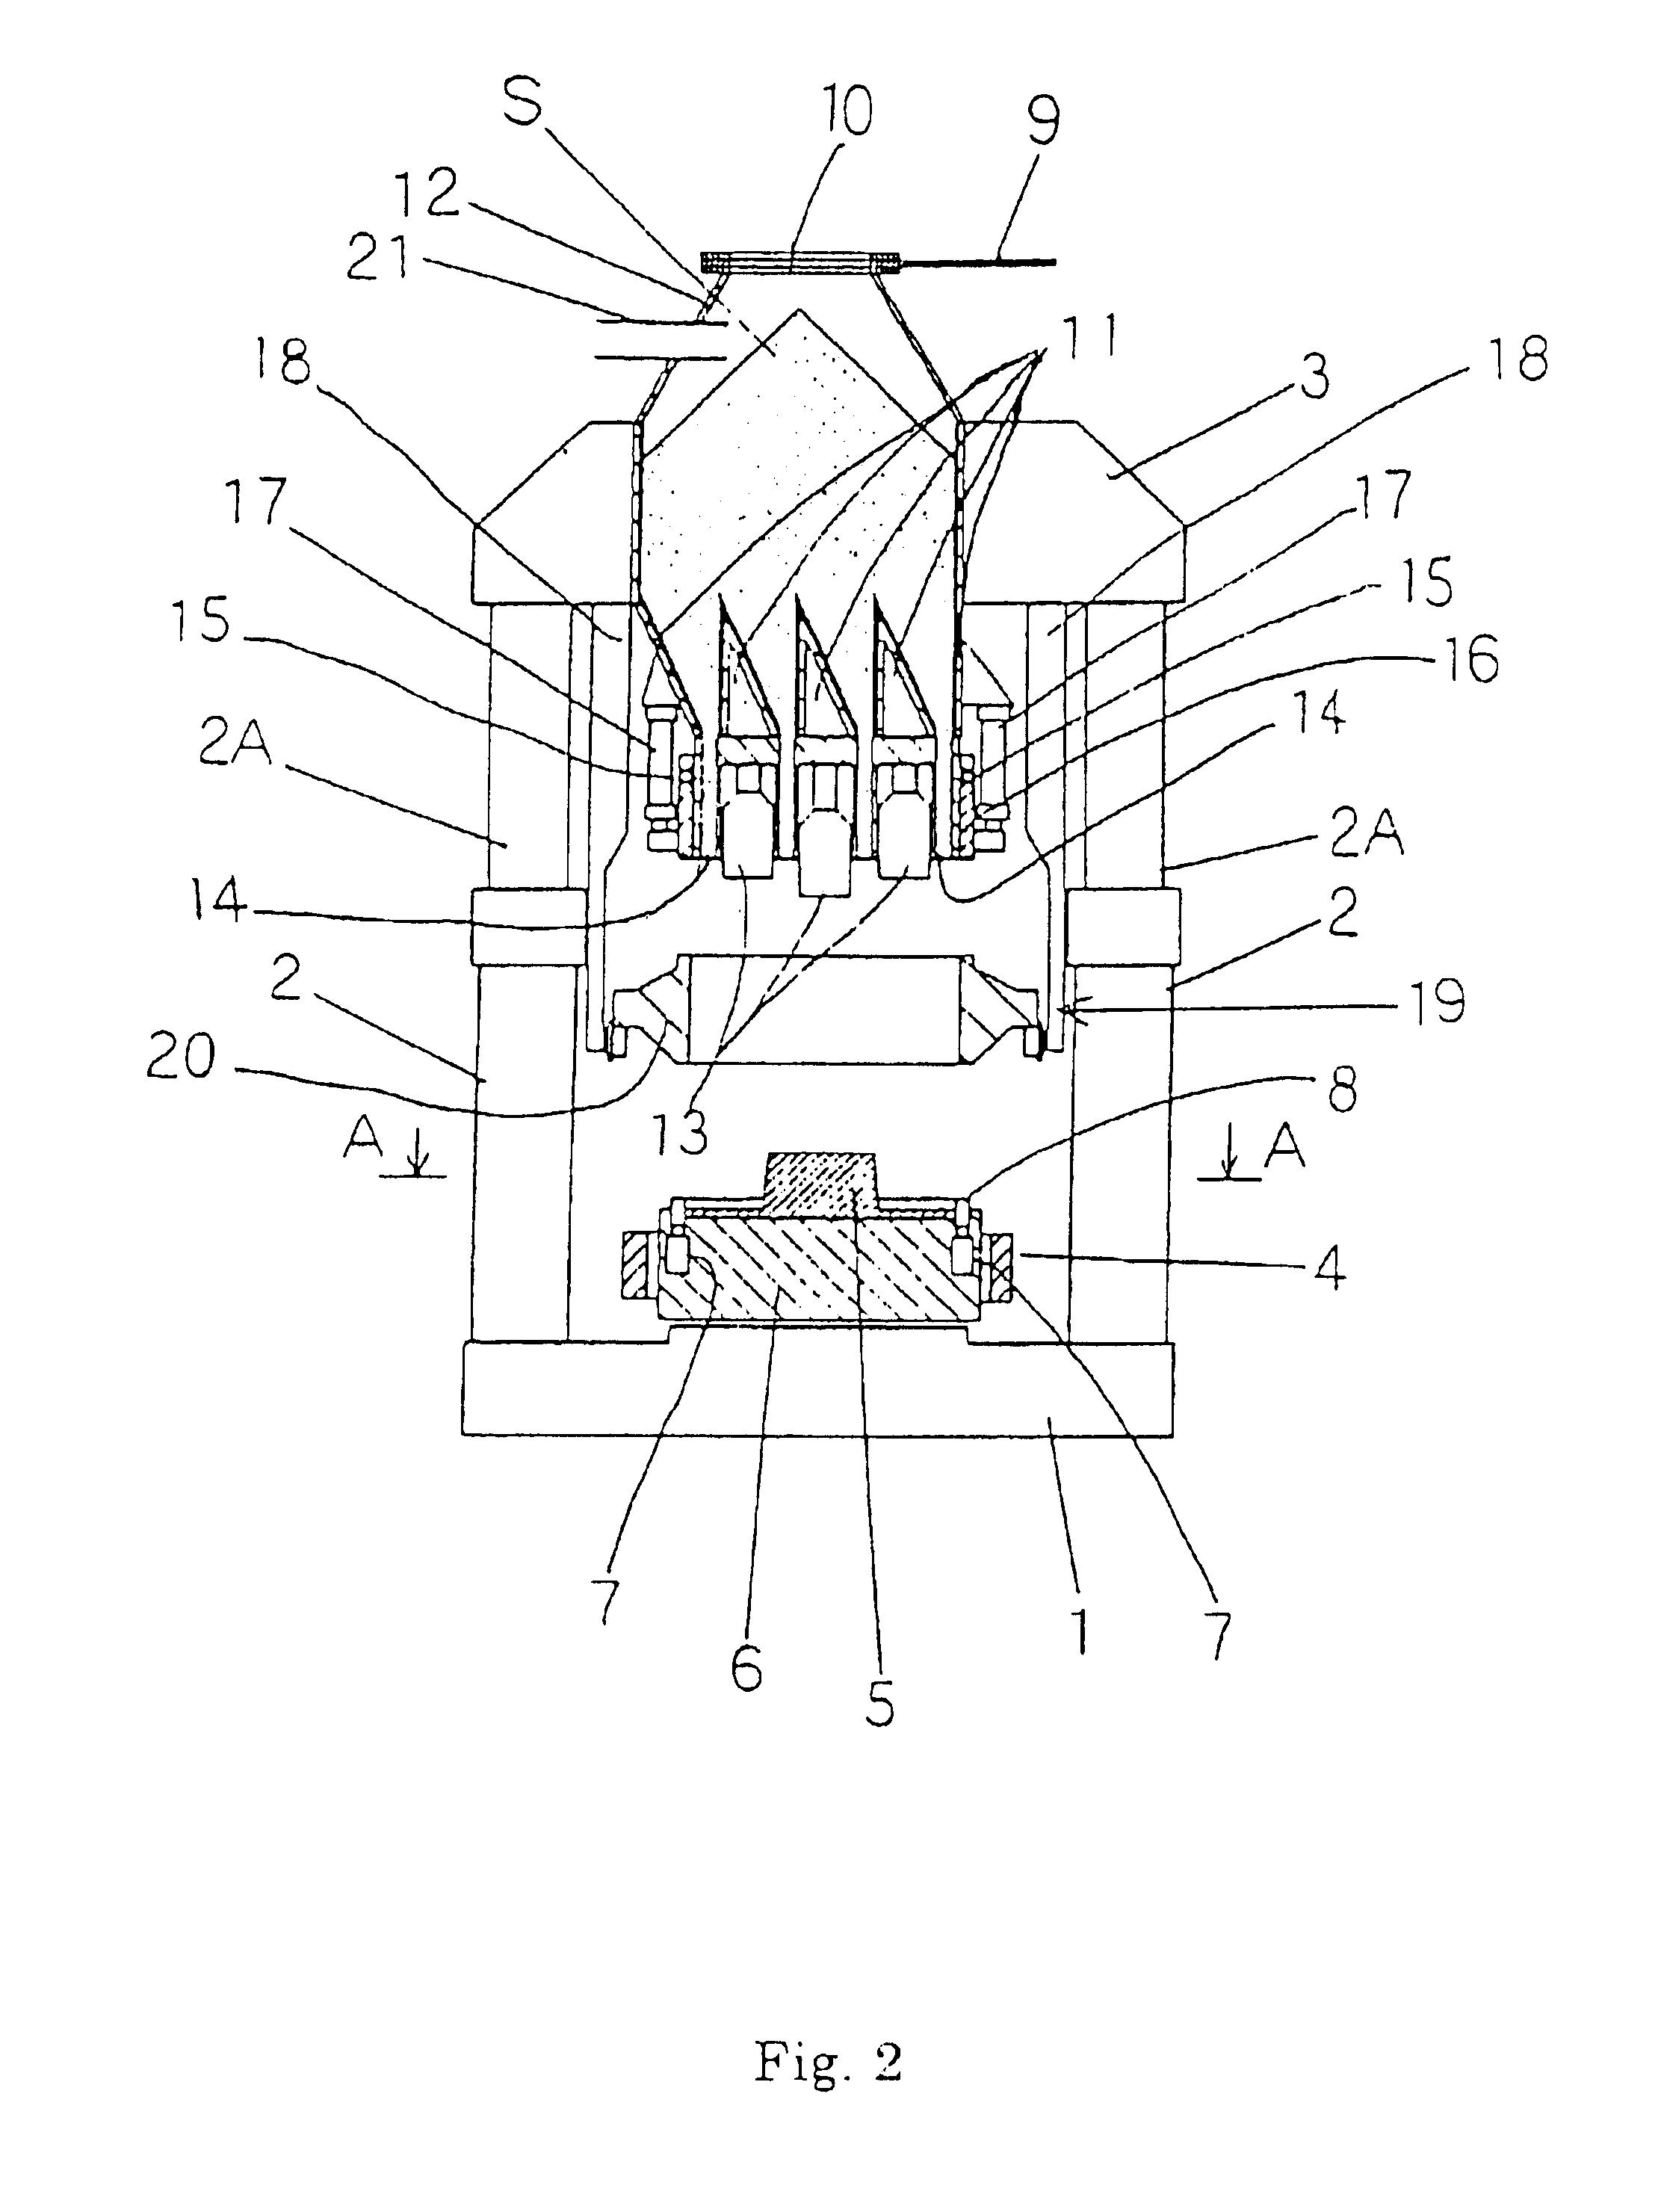 Die molding machine and pattern carrier